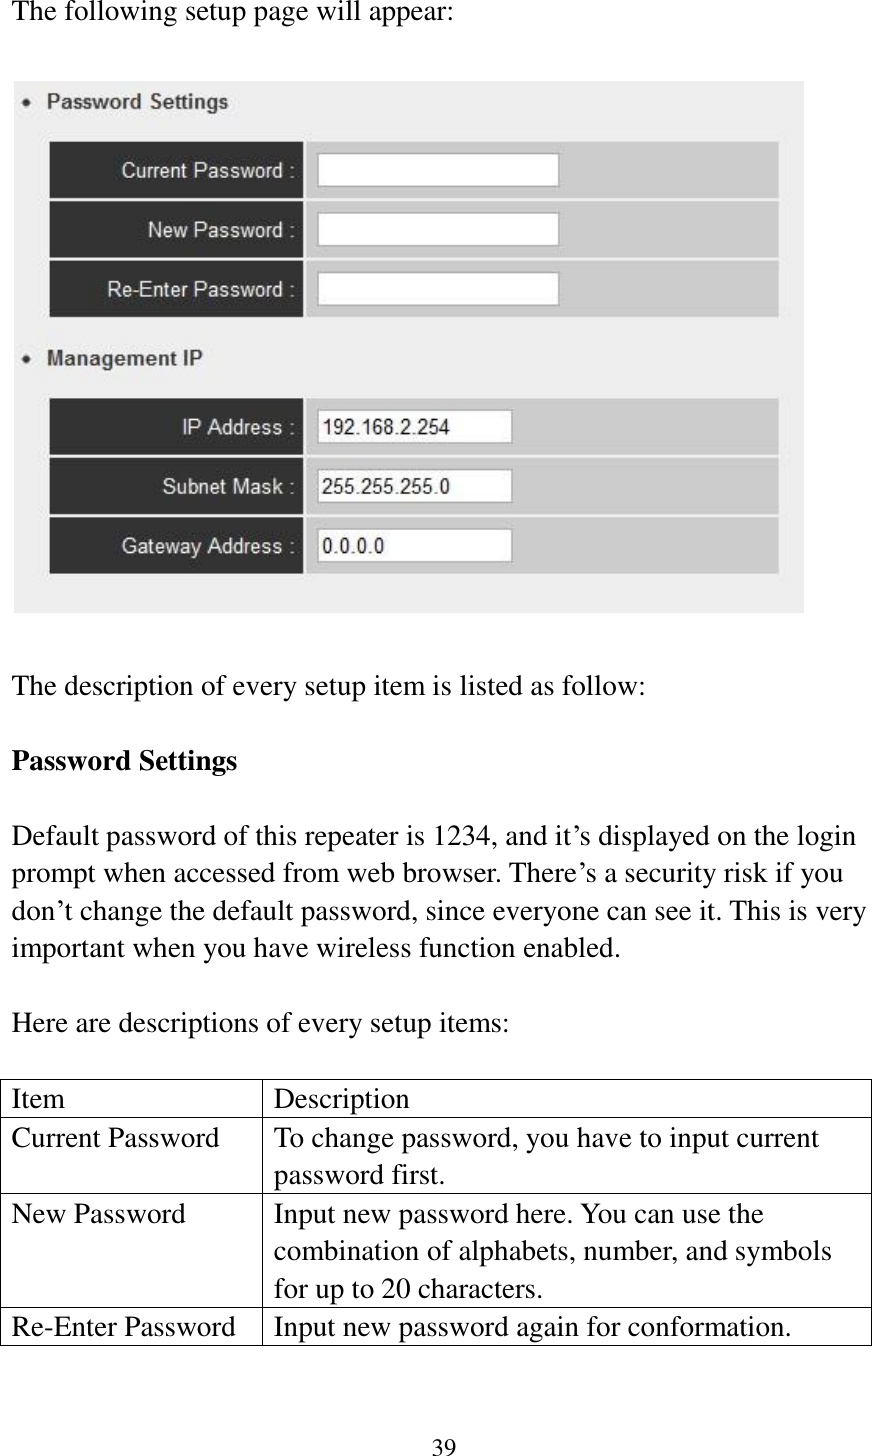 39  The following setup page will appear:    The description of every setup item is listed as follow:  Password Settings  Default password of this repeater is 1234, and it‟s displayed on the login prompt when accessed from web browser. There‟s a security risk if you don‟t change the default password, since everyone can see it. This is very important when you have wireless function enabled.  Here are descriptions of every setup items:  Item Description Current Password To change password, you have to input current password first. New Password Input new password here. You can use the combination of alphabets, number, and symbols for up to 20 characters. Re-Enter Password Input new password again for conformation.  